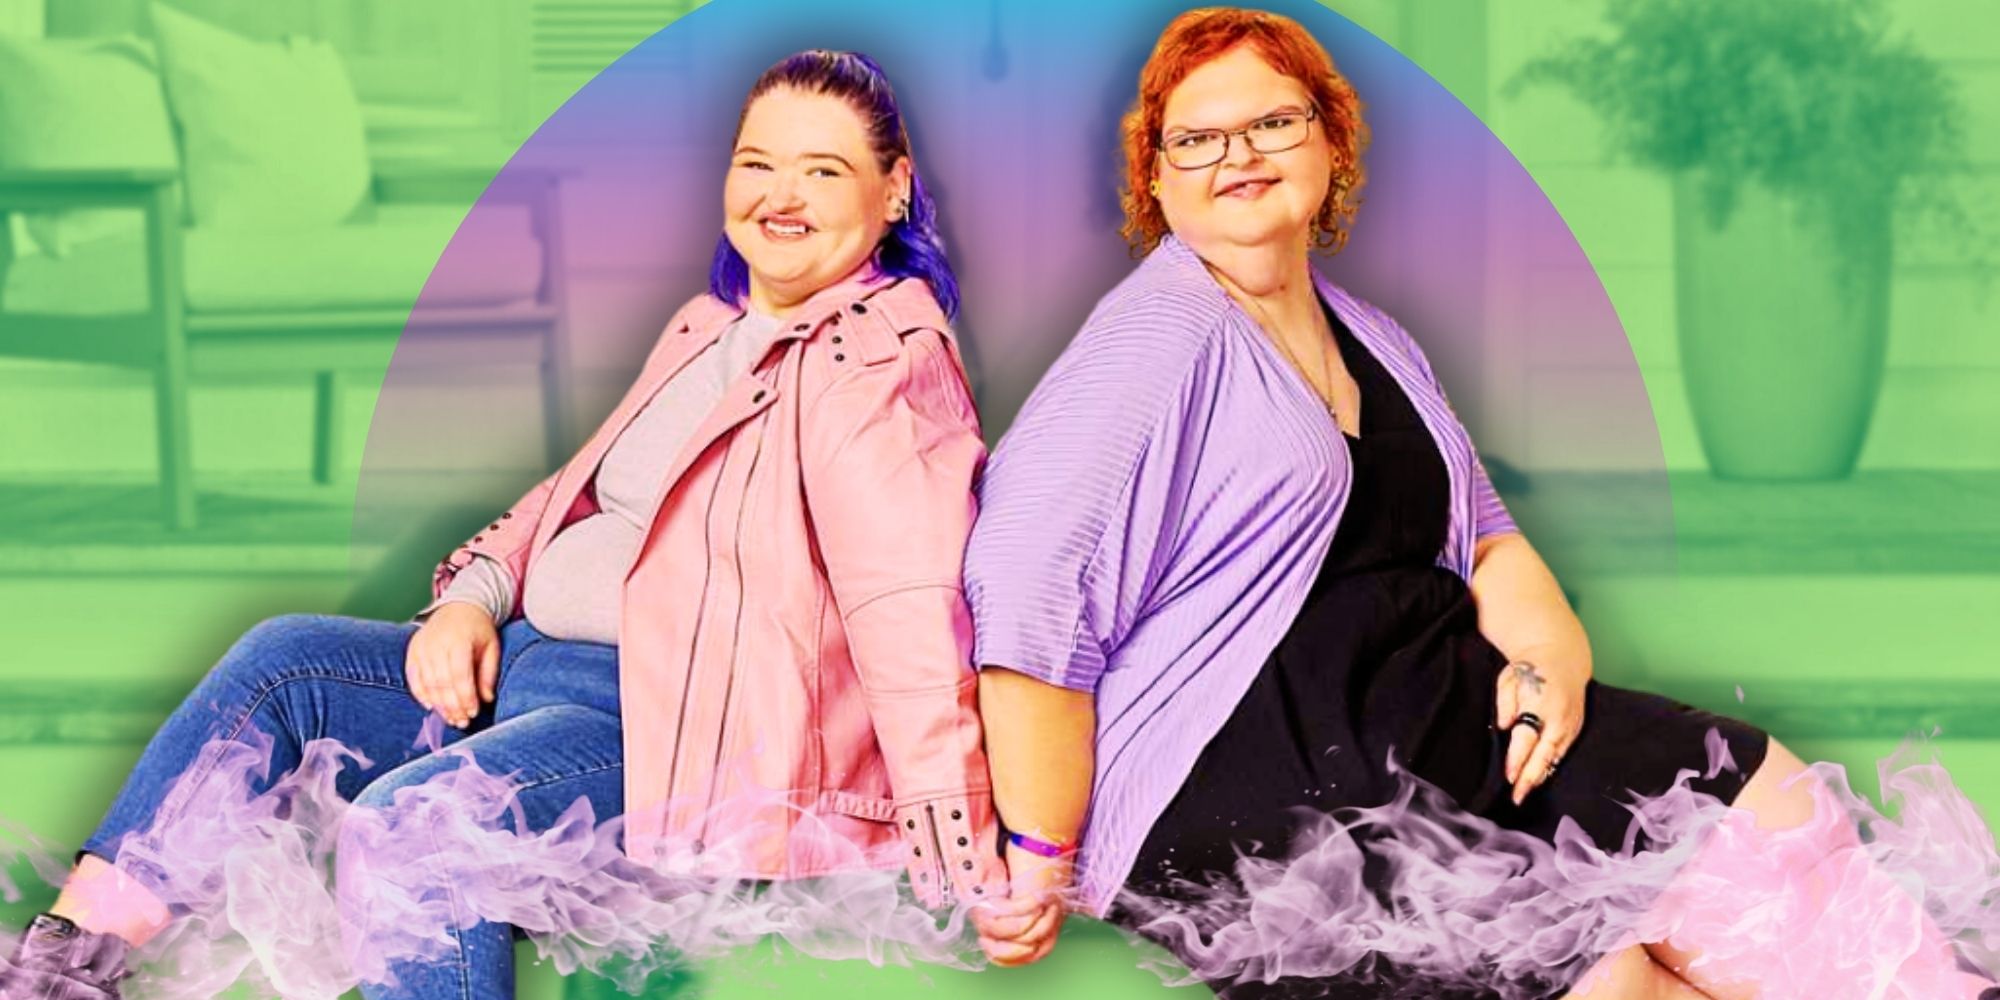 1000-lb Sisters Season 5 promo image of Amy and Tammy